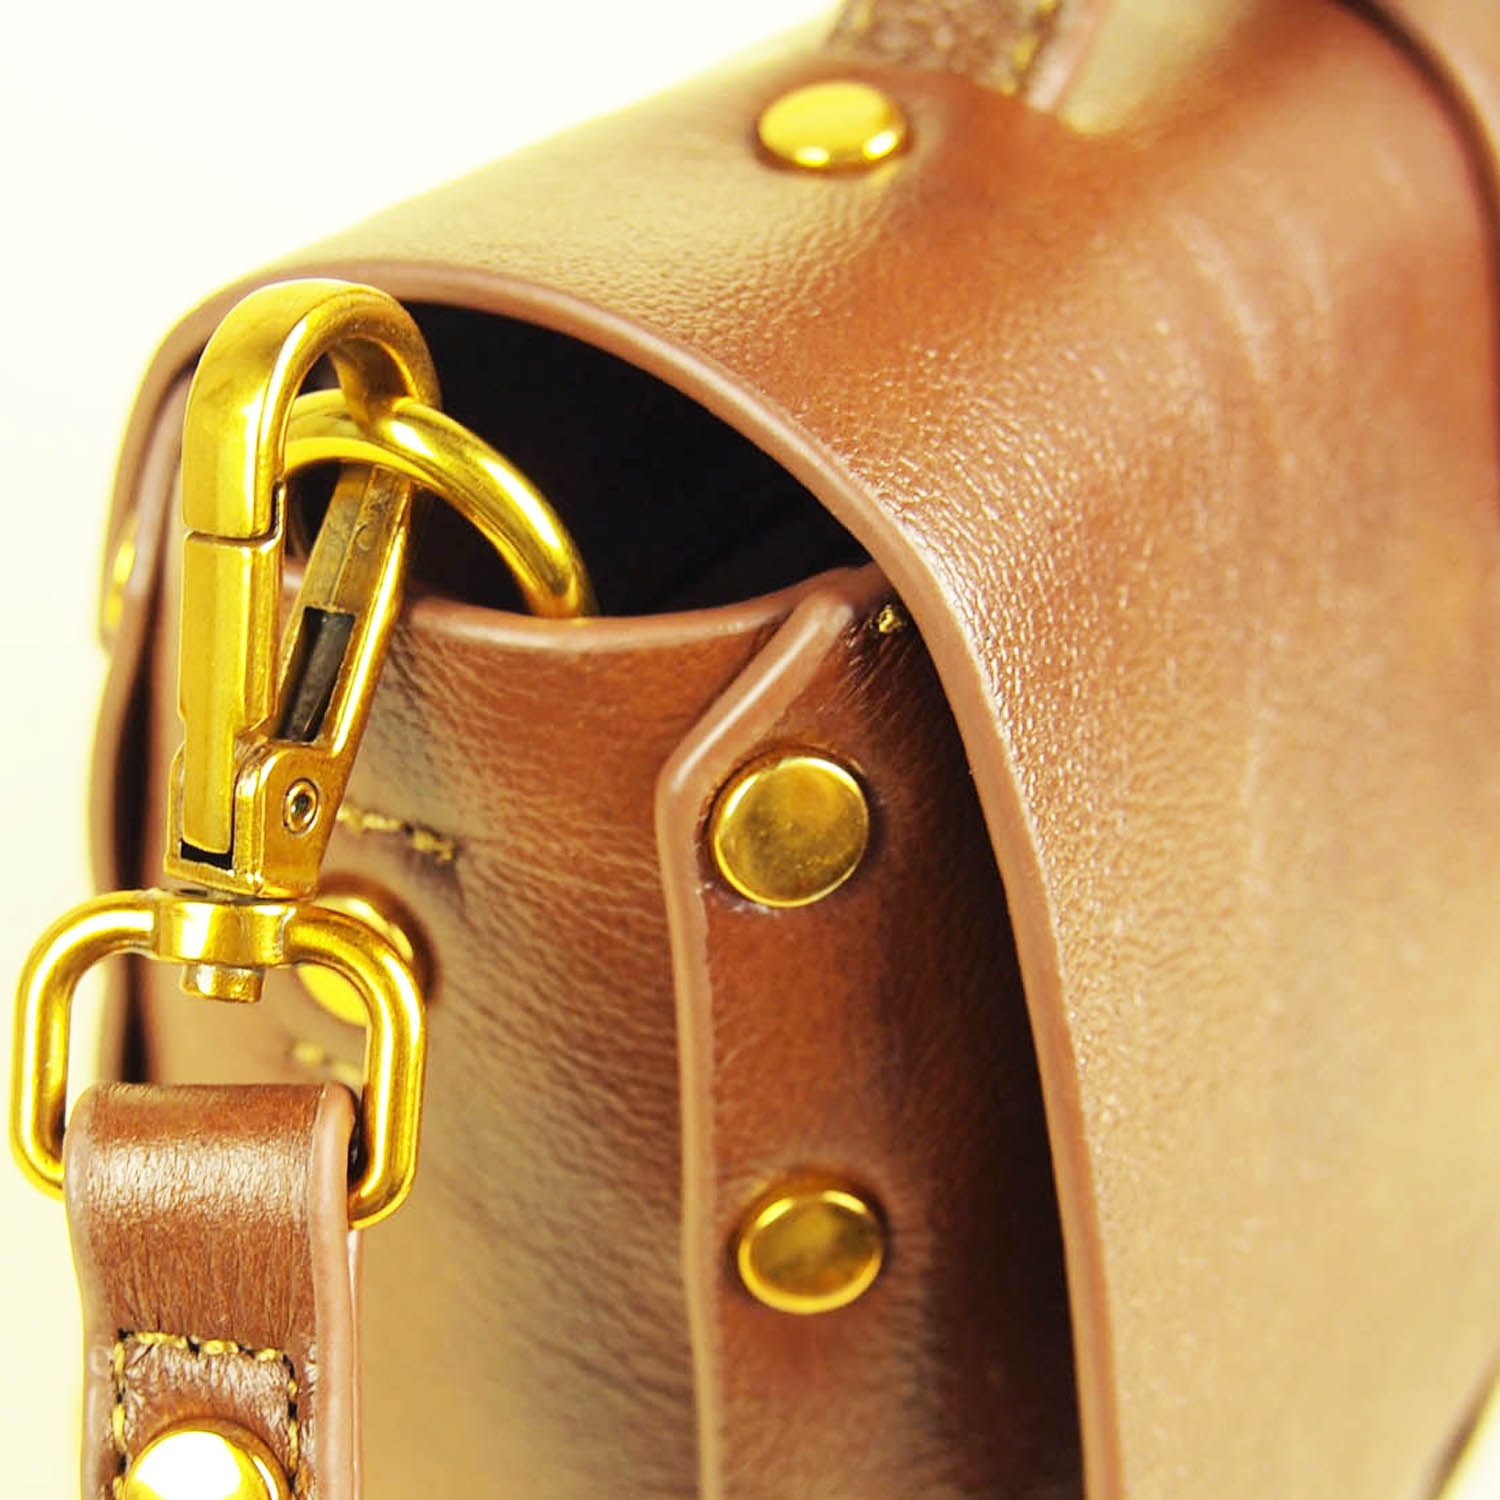 Magnificent Modern Heritage Yaffa Crossbody Studs and Leather